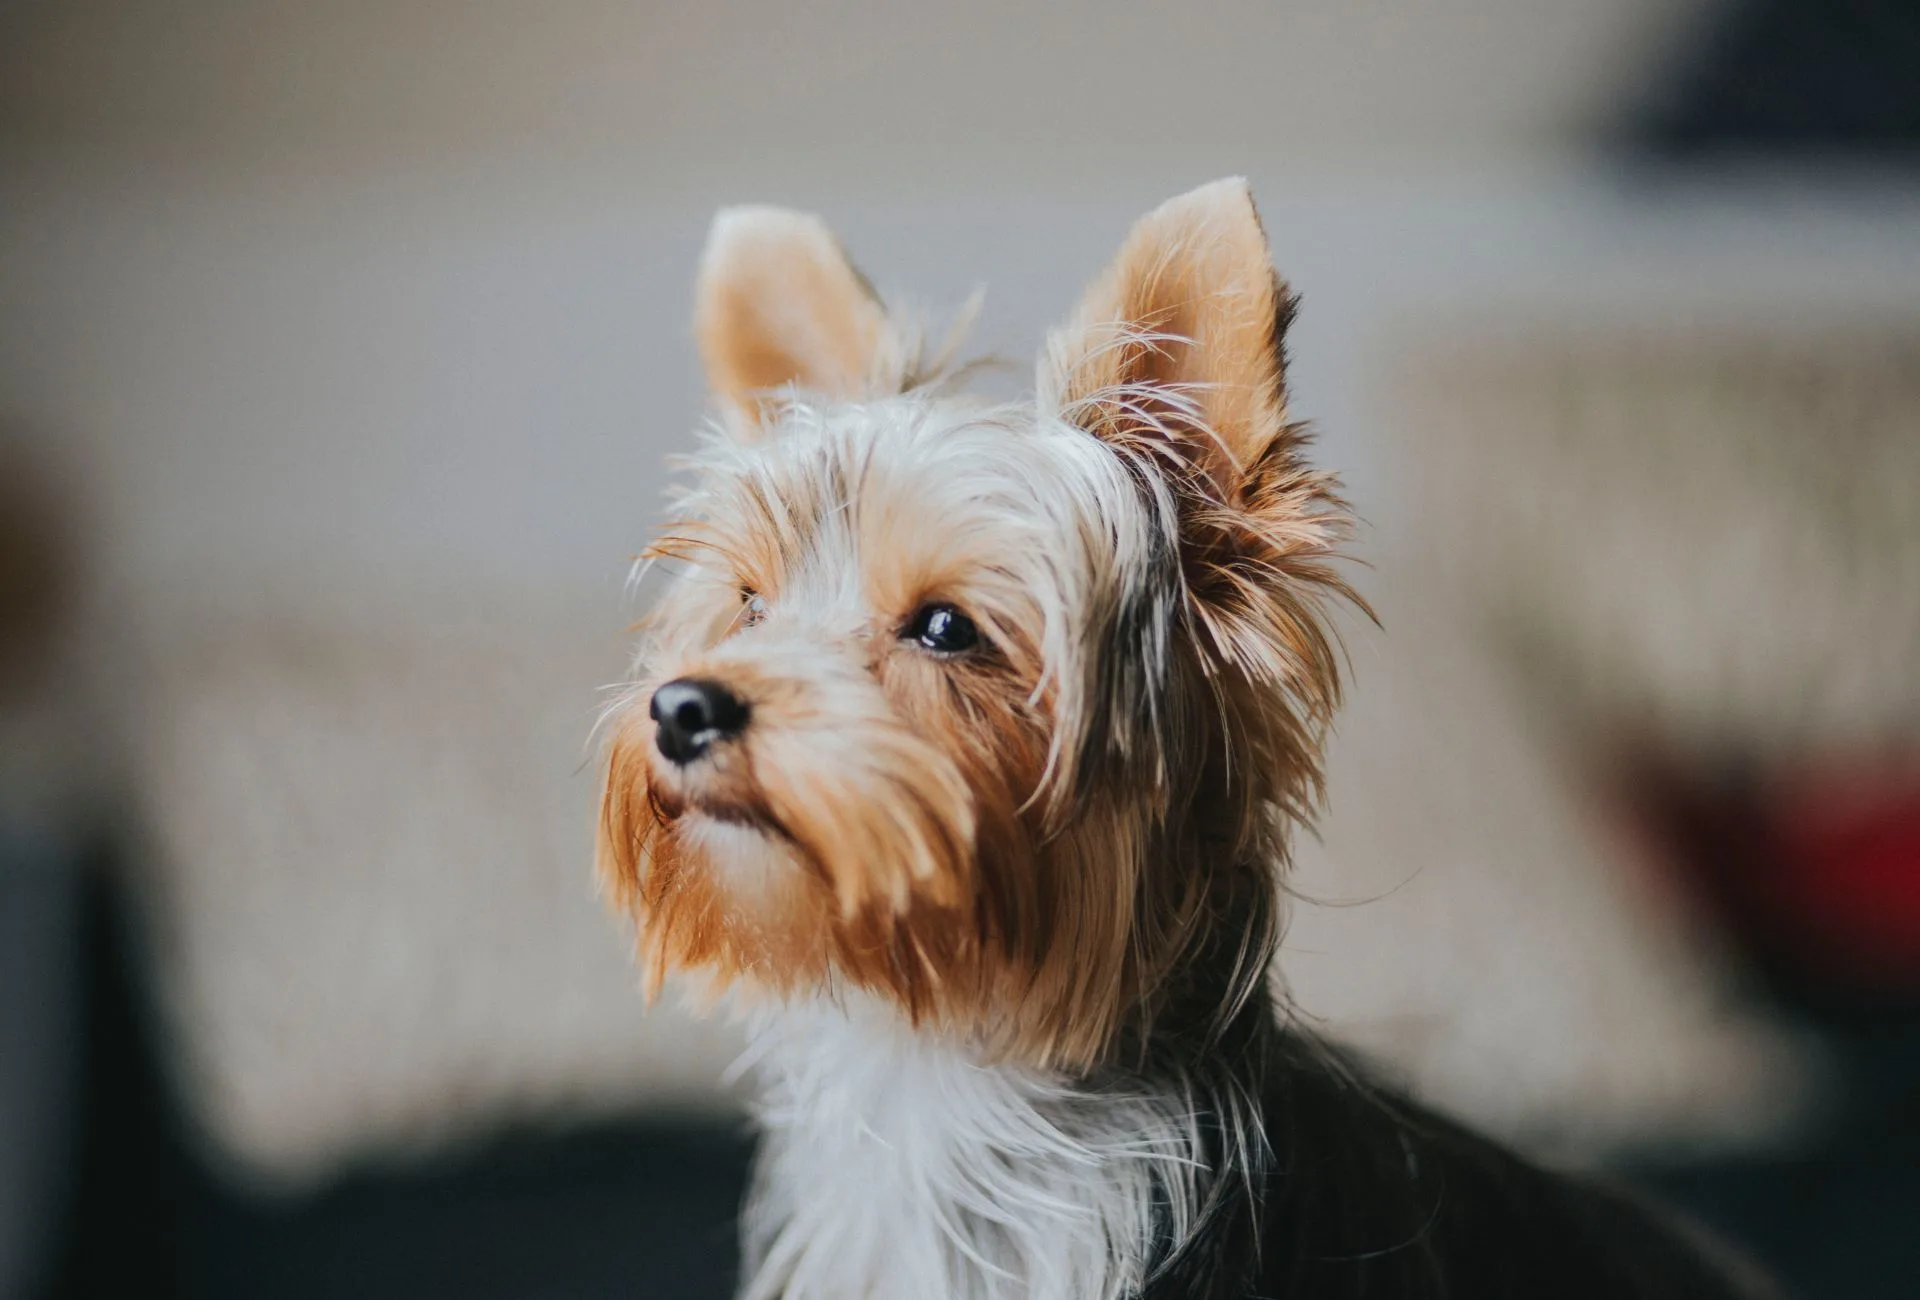 Small Yorkshire Terrier looking out a window.